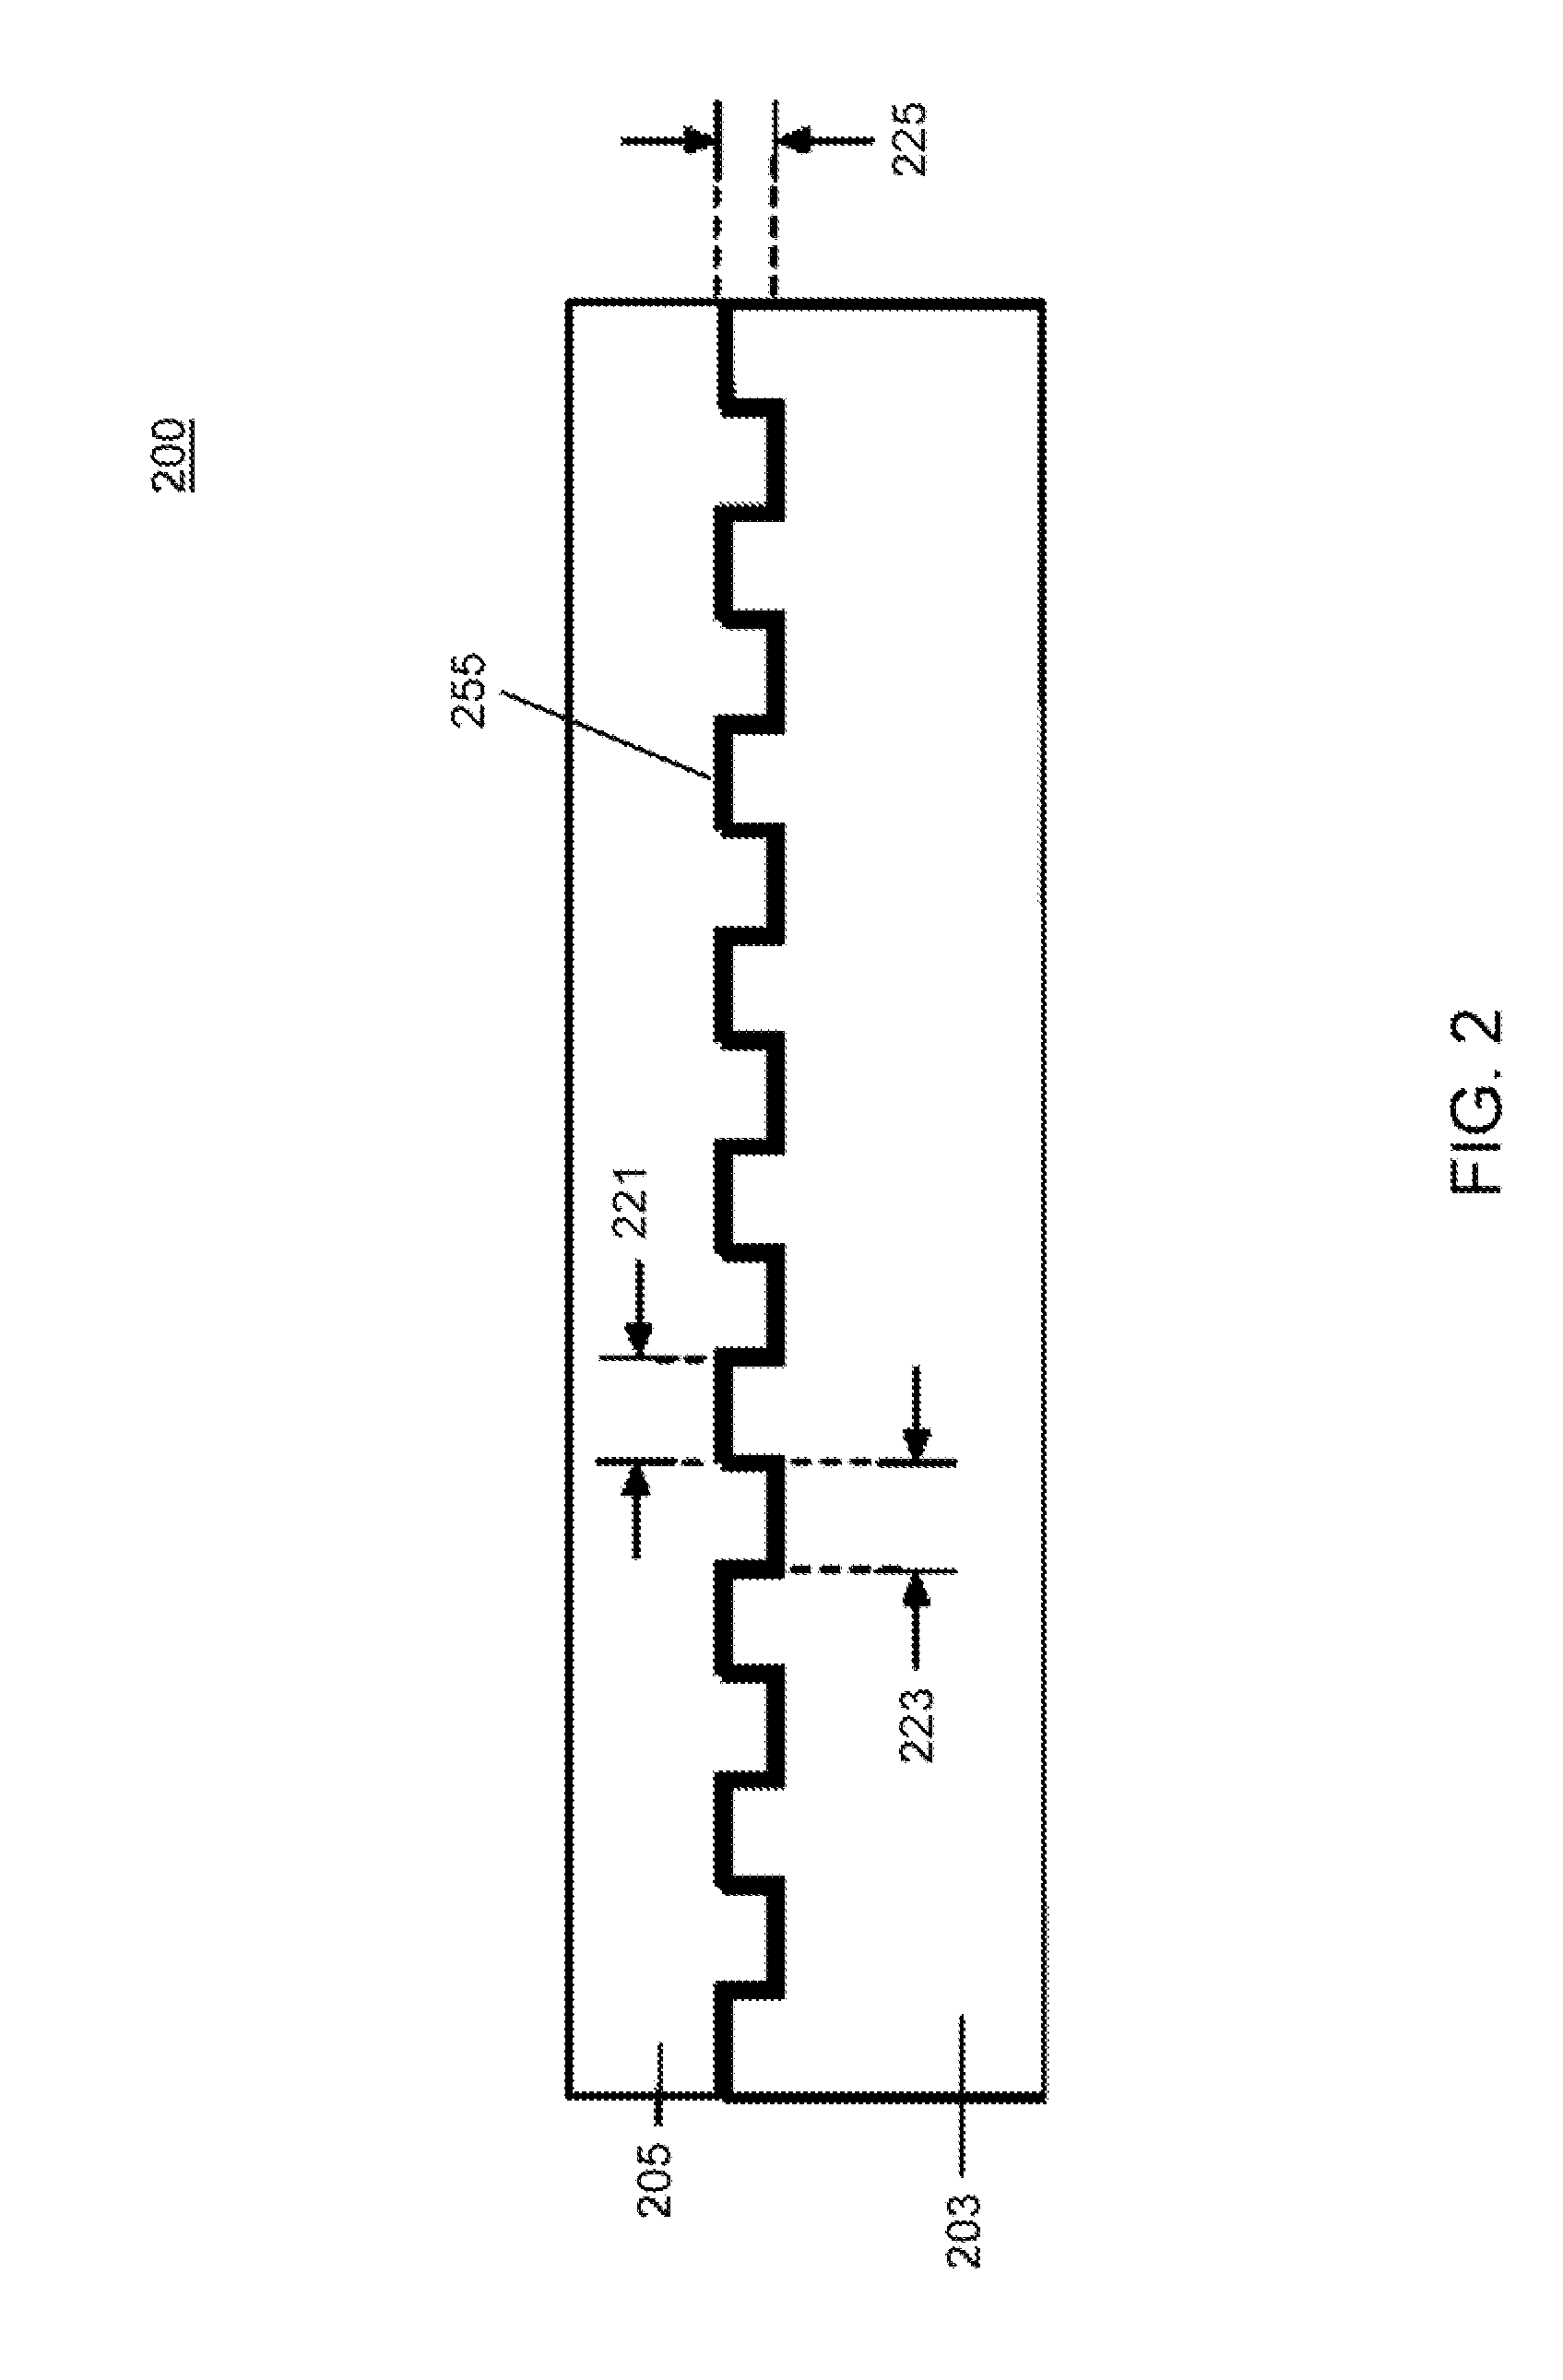 Planar plasmonic device for light reflection, diffusion and guiding